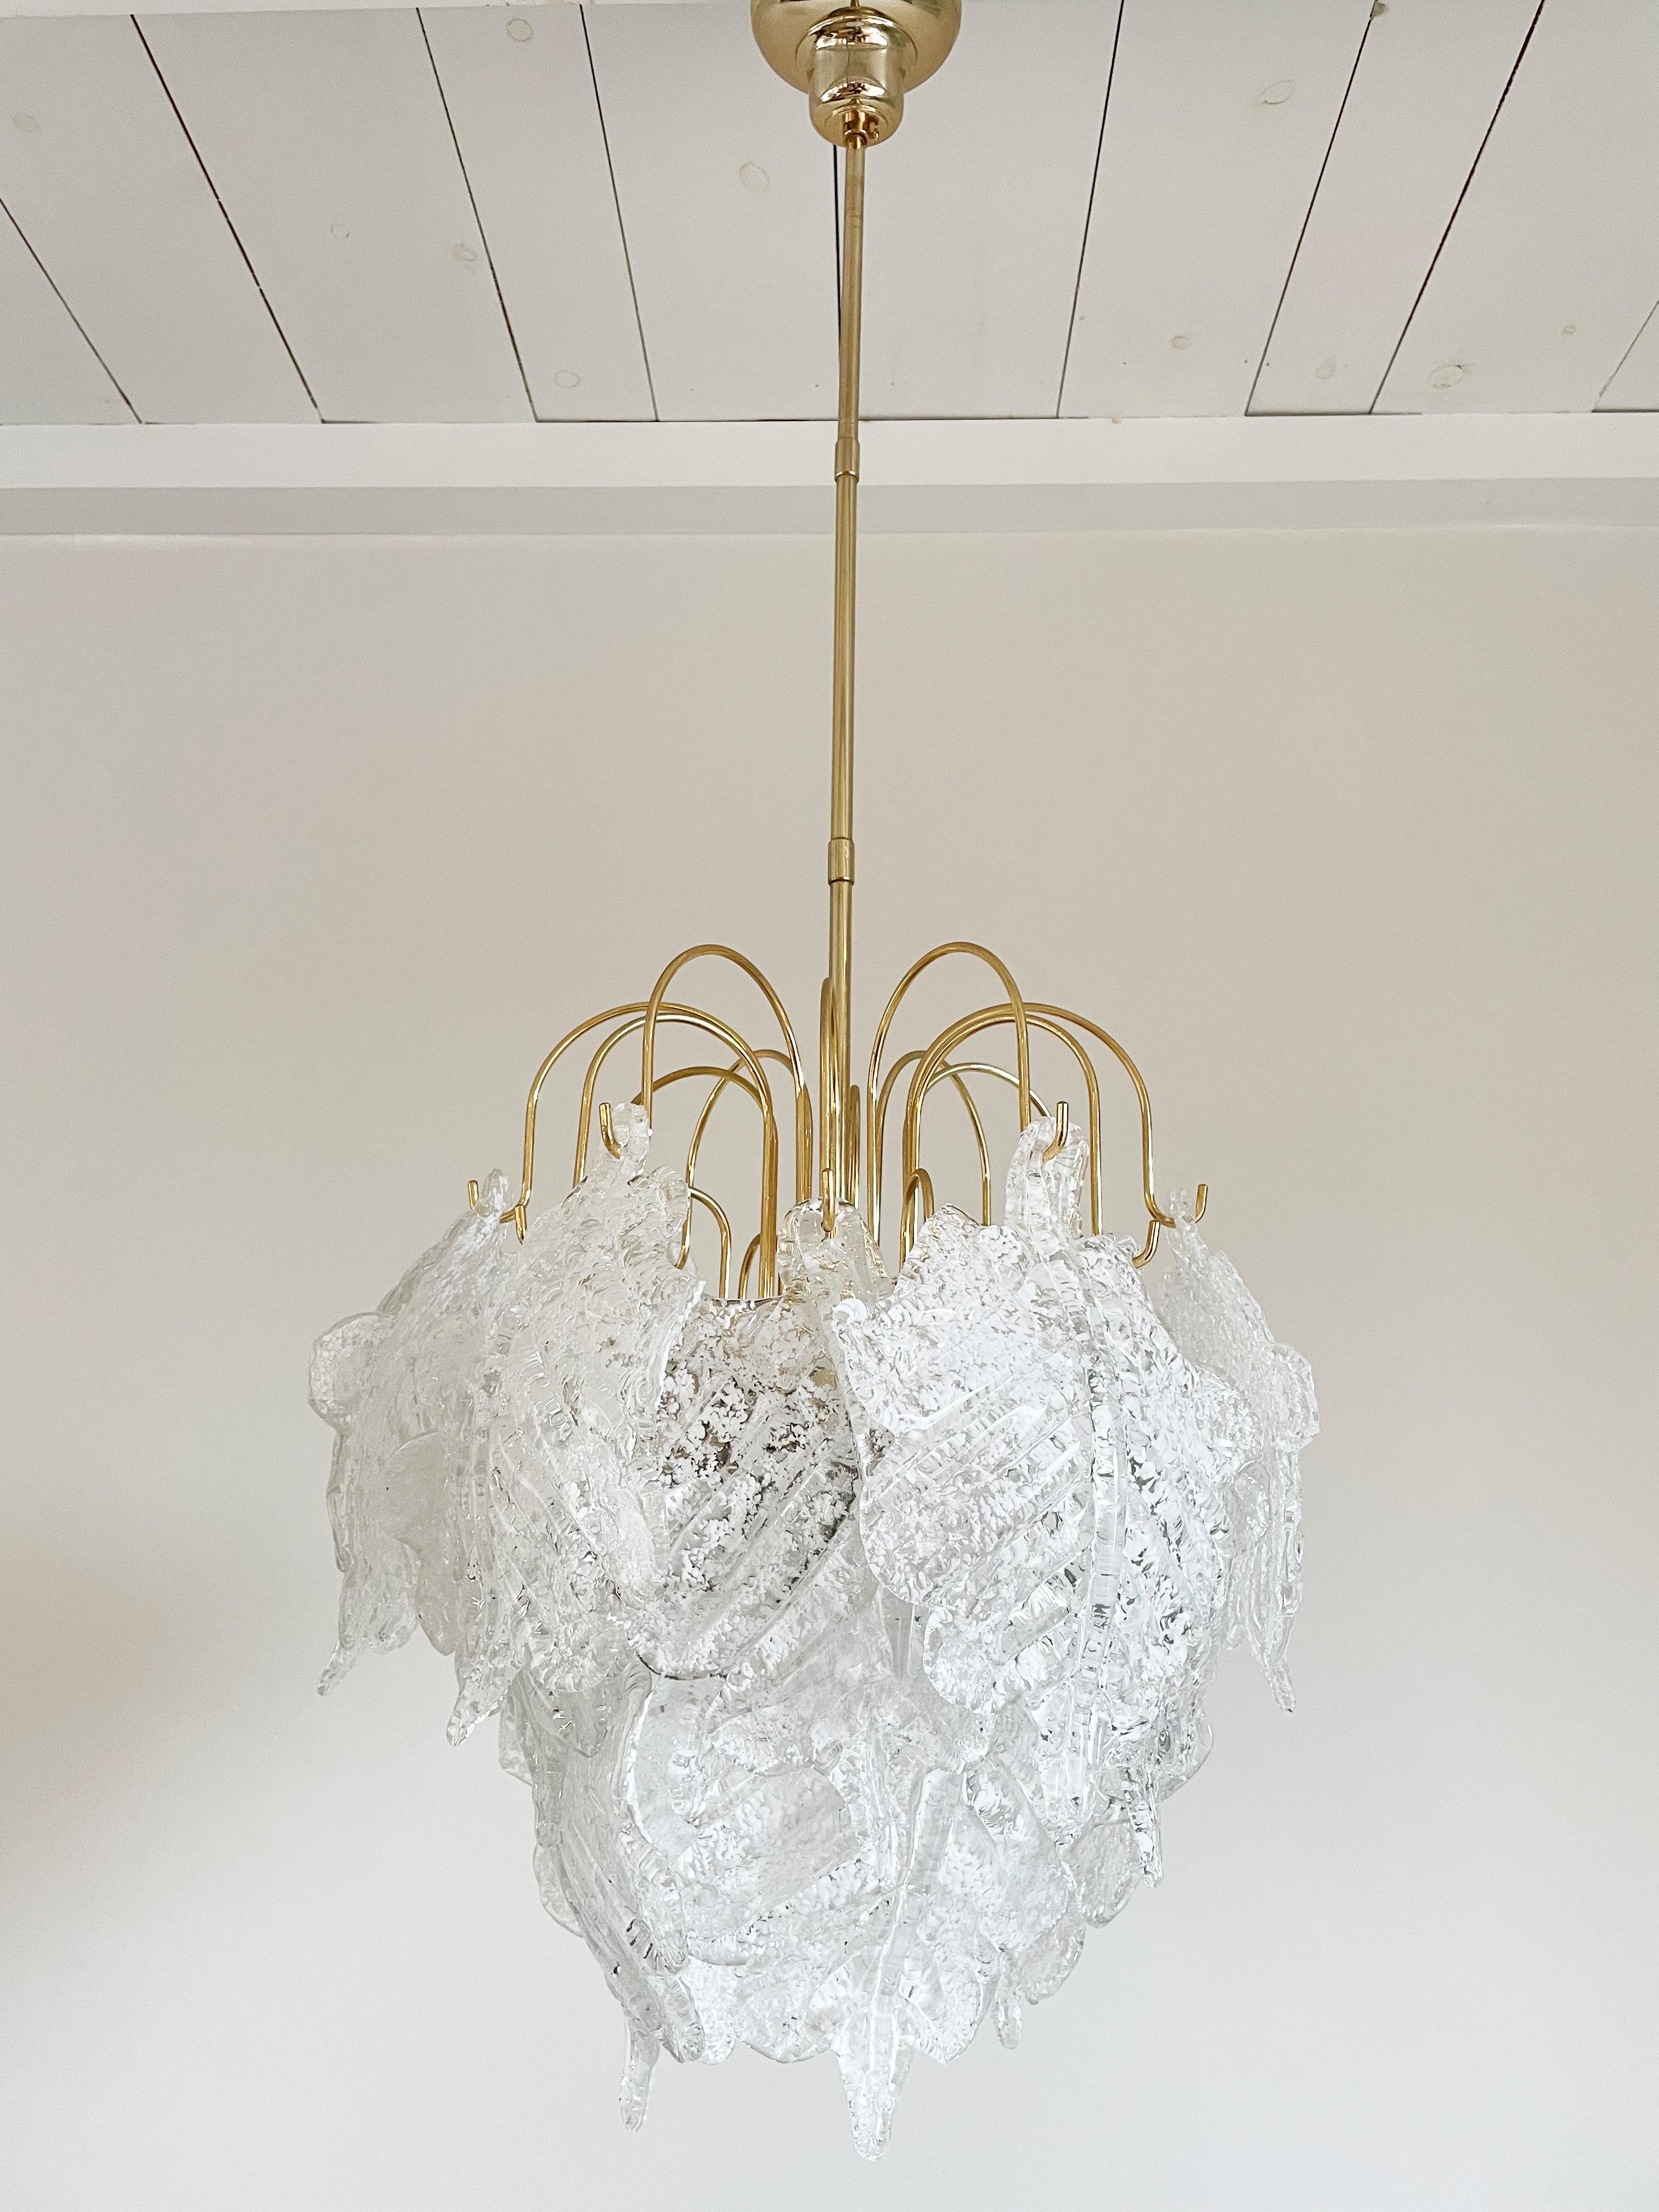 Stunning chandelier with handmade glass murano leaf shaped glasses with white flaking to give a cool effect.

Beautifully crafted and the chandelier emits a stunning light.

Good condition

1970s - Italy

Measures: Height: